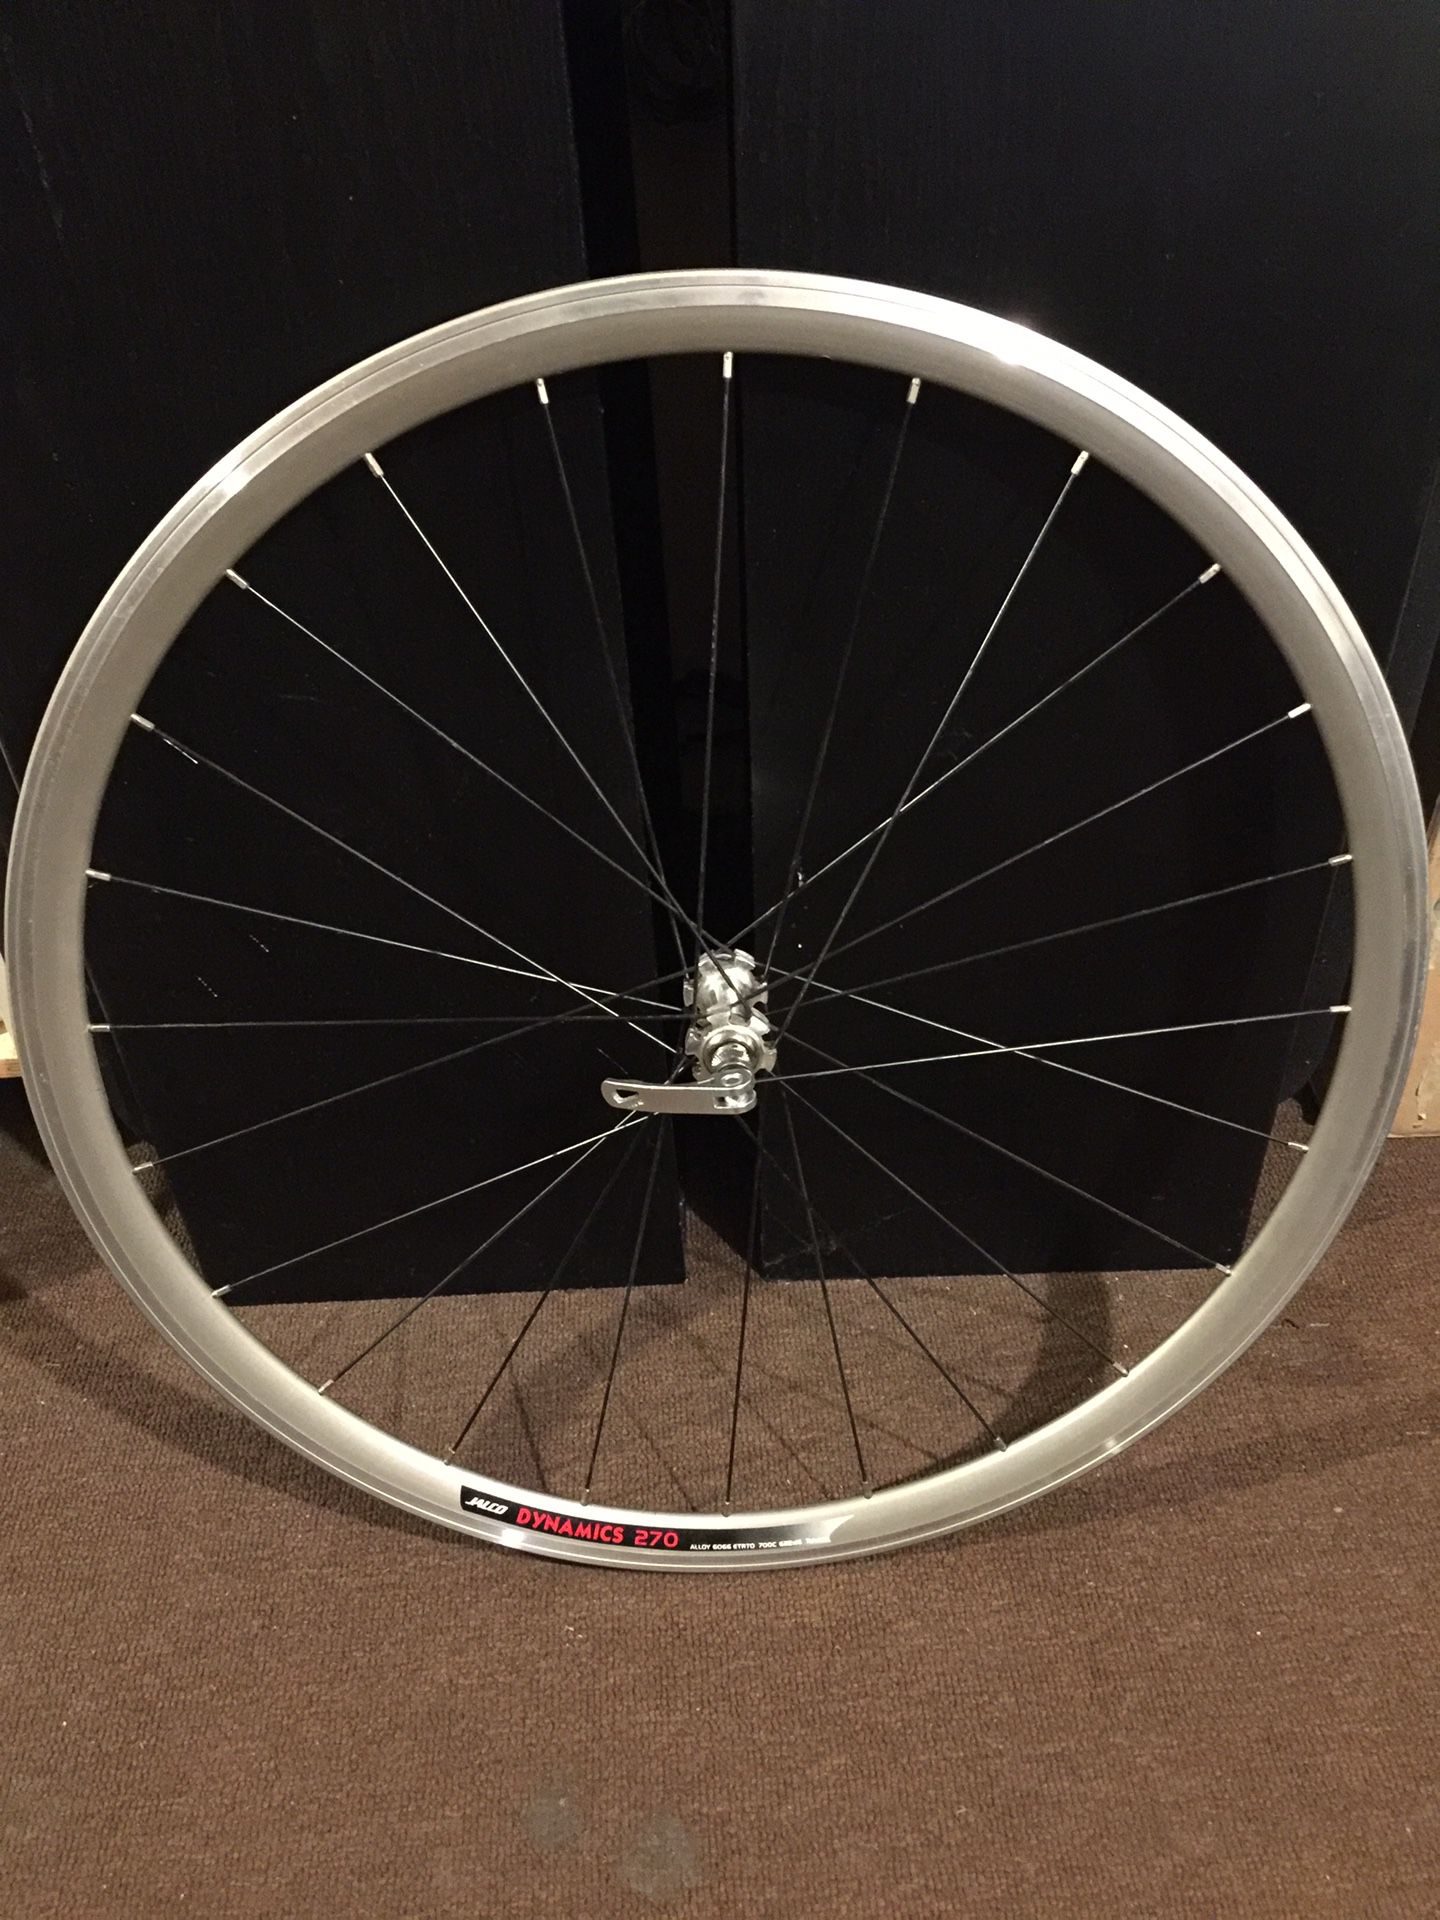 JALCO Dynamics 270 alloy wheelset’ 700c with specialized hub front & rear’